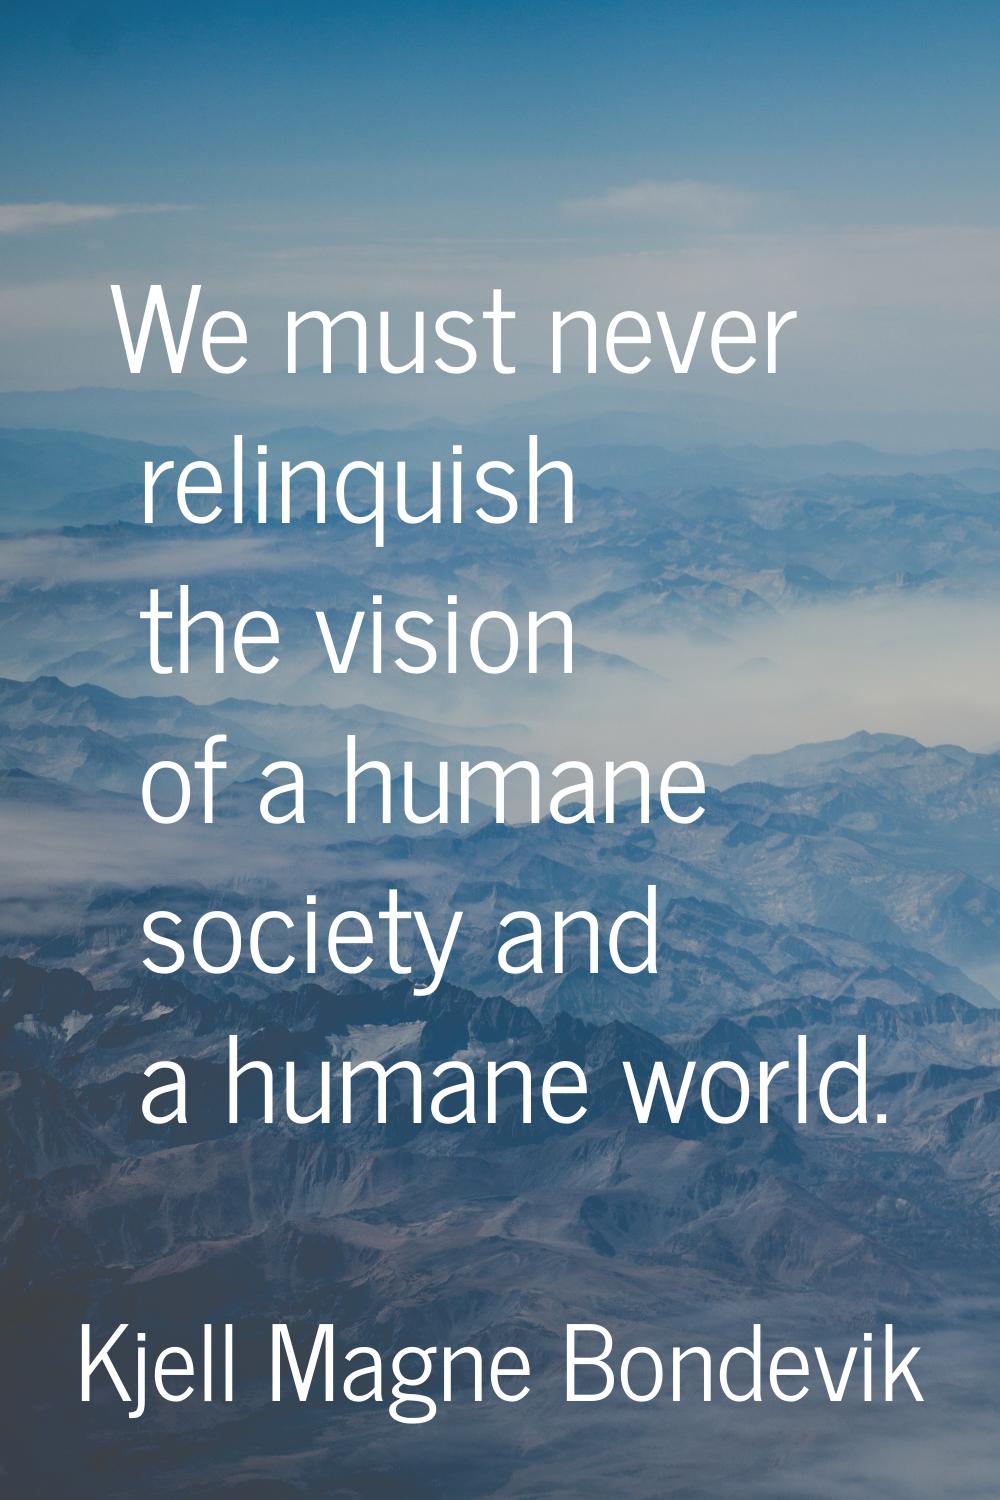 We must never relinquish the vision of a humane society and a humane world.